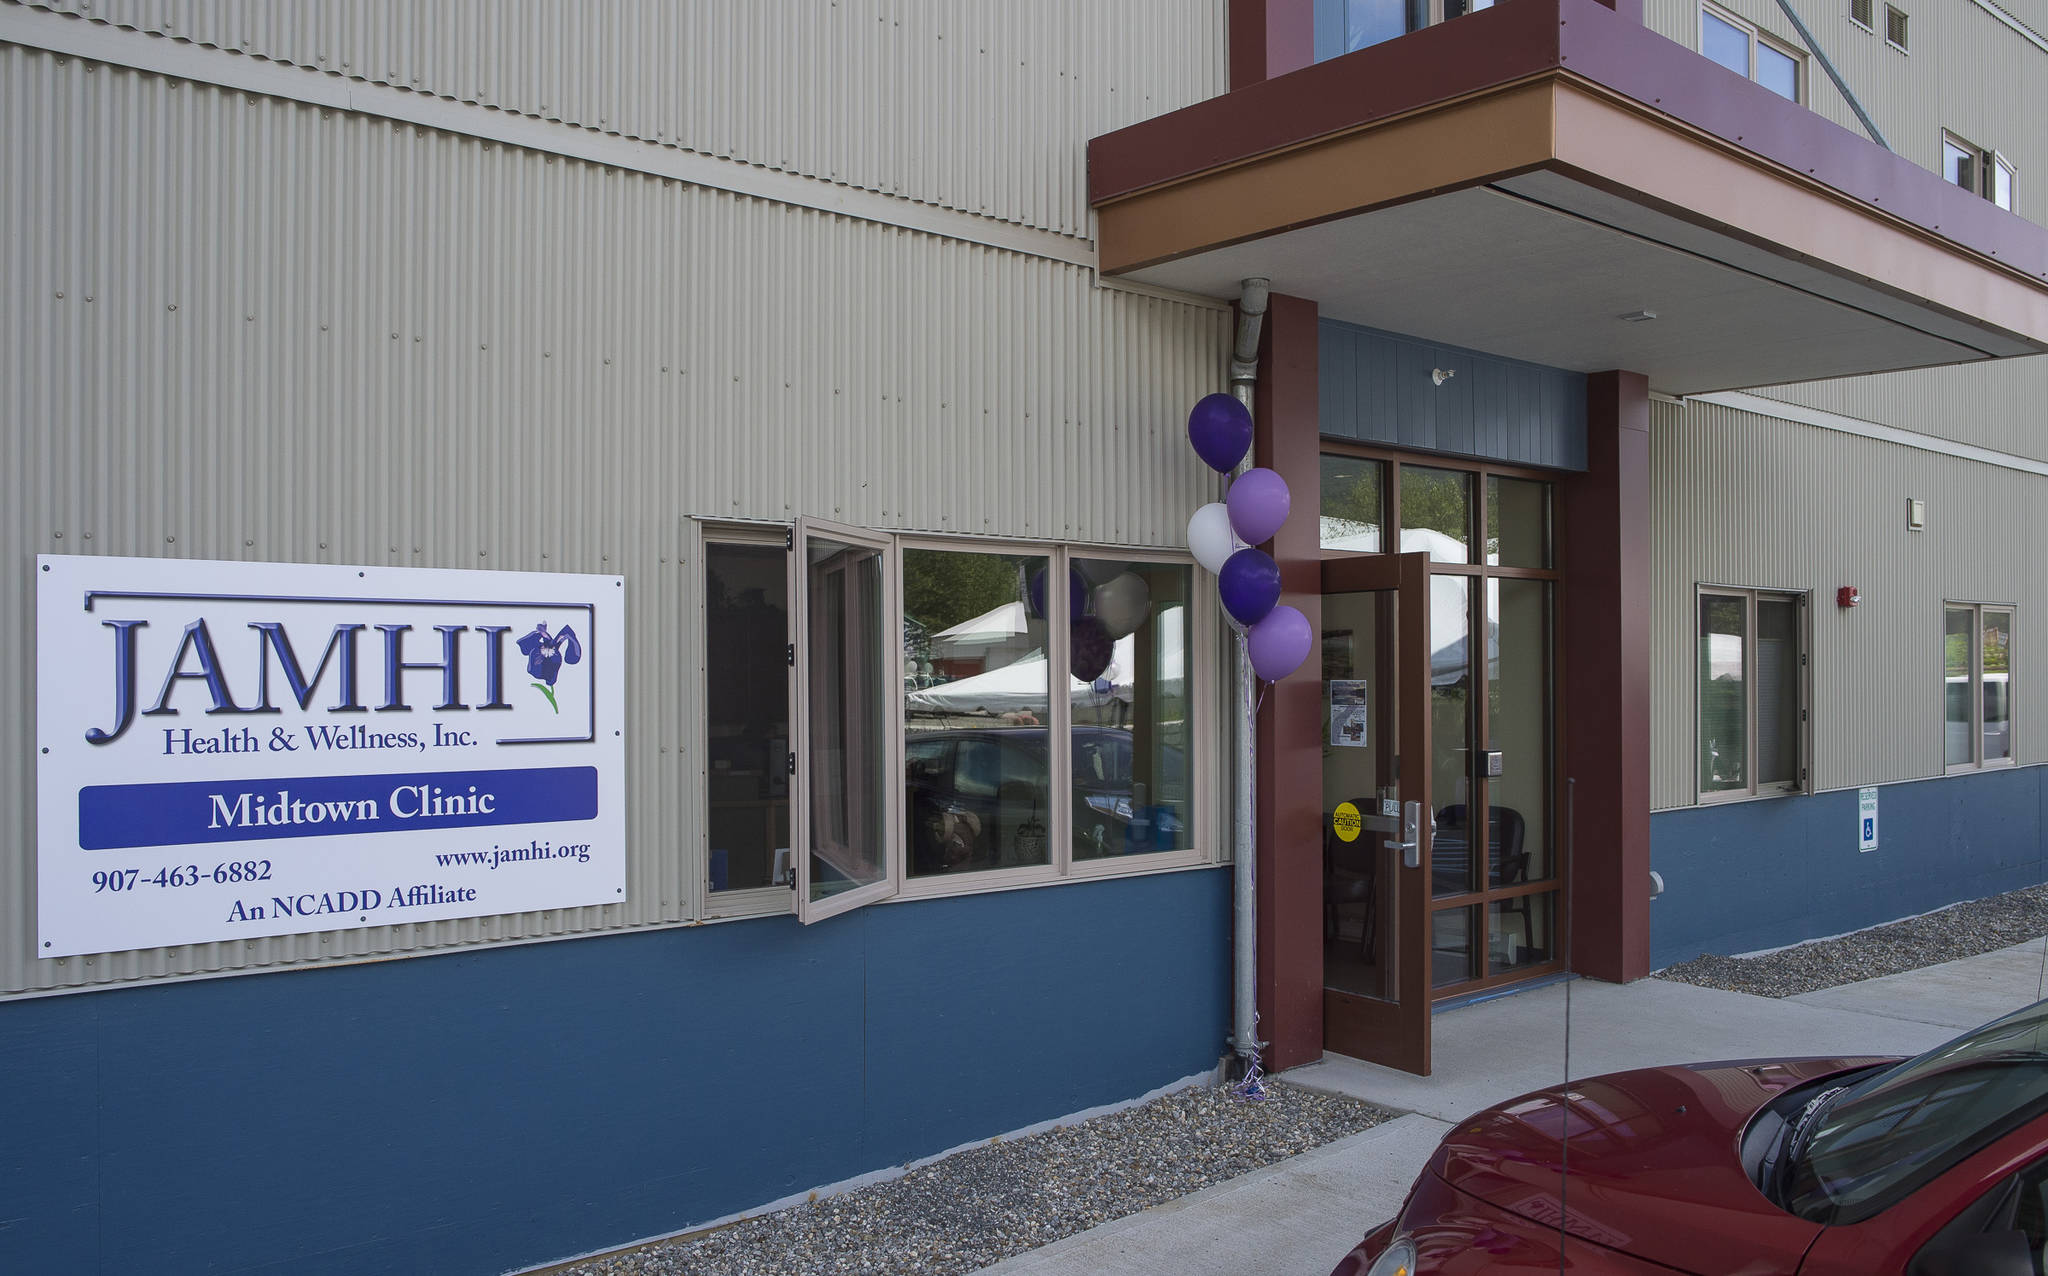 A JAMHI Health & Wellness Inc. sign is shown in this June 2018 photo. At the time, JAMHI celebrated the opening of its Midtown Clinic located at the House First Project. (Michael Penn / Juneau Empire)